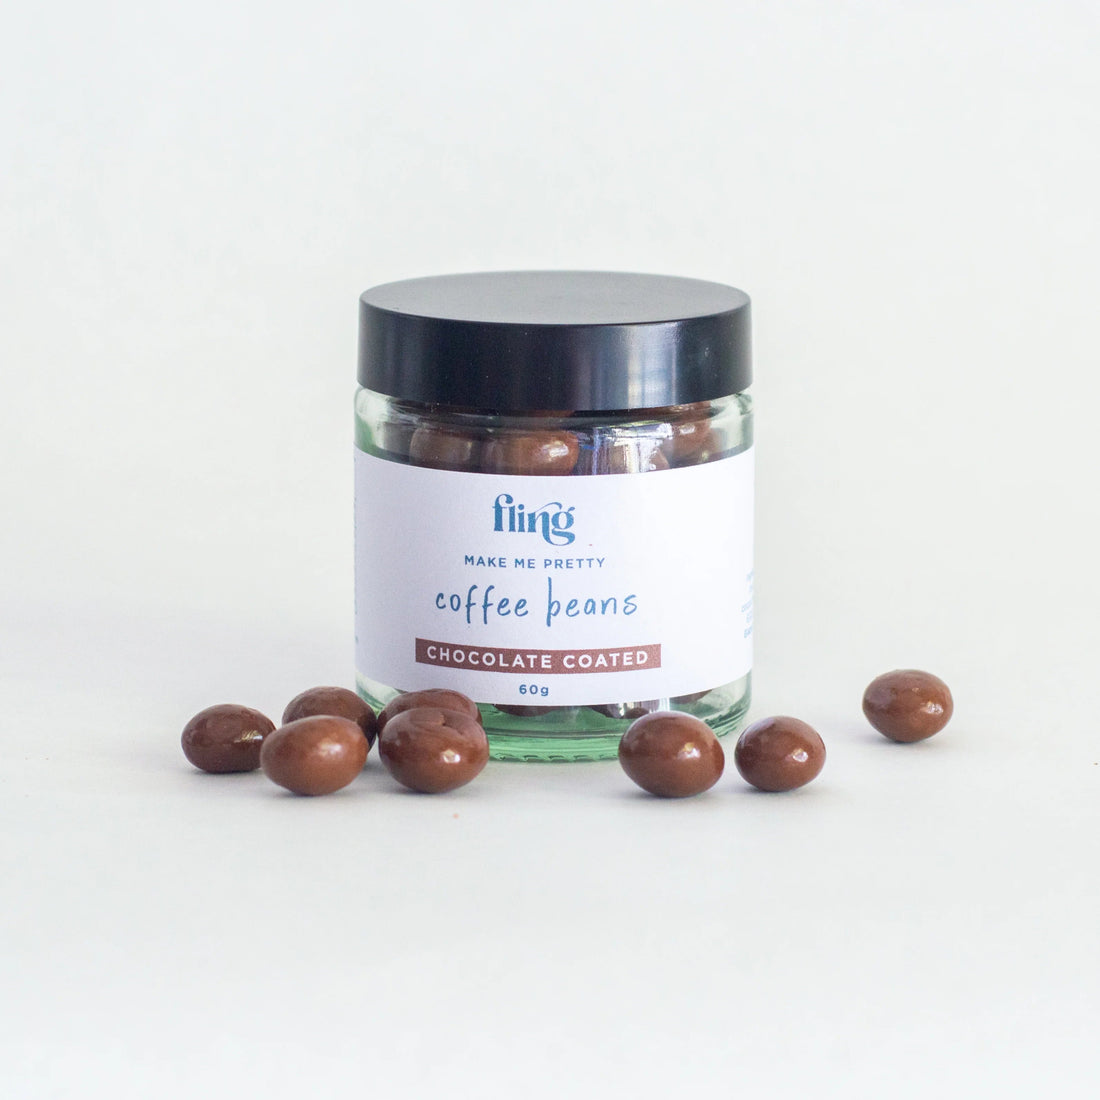 Fling Cocktails - Chocolate Coated Coffee Beans - The Flower Crate